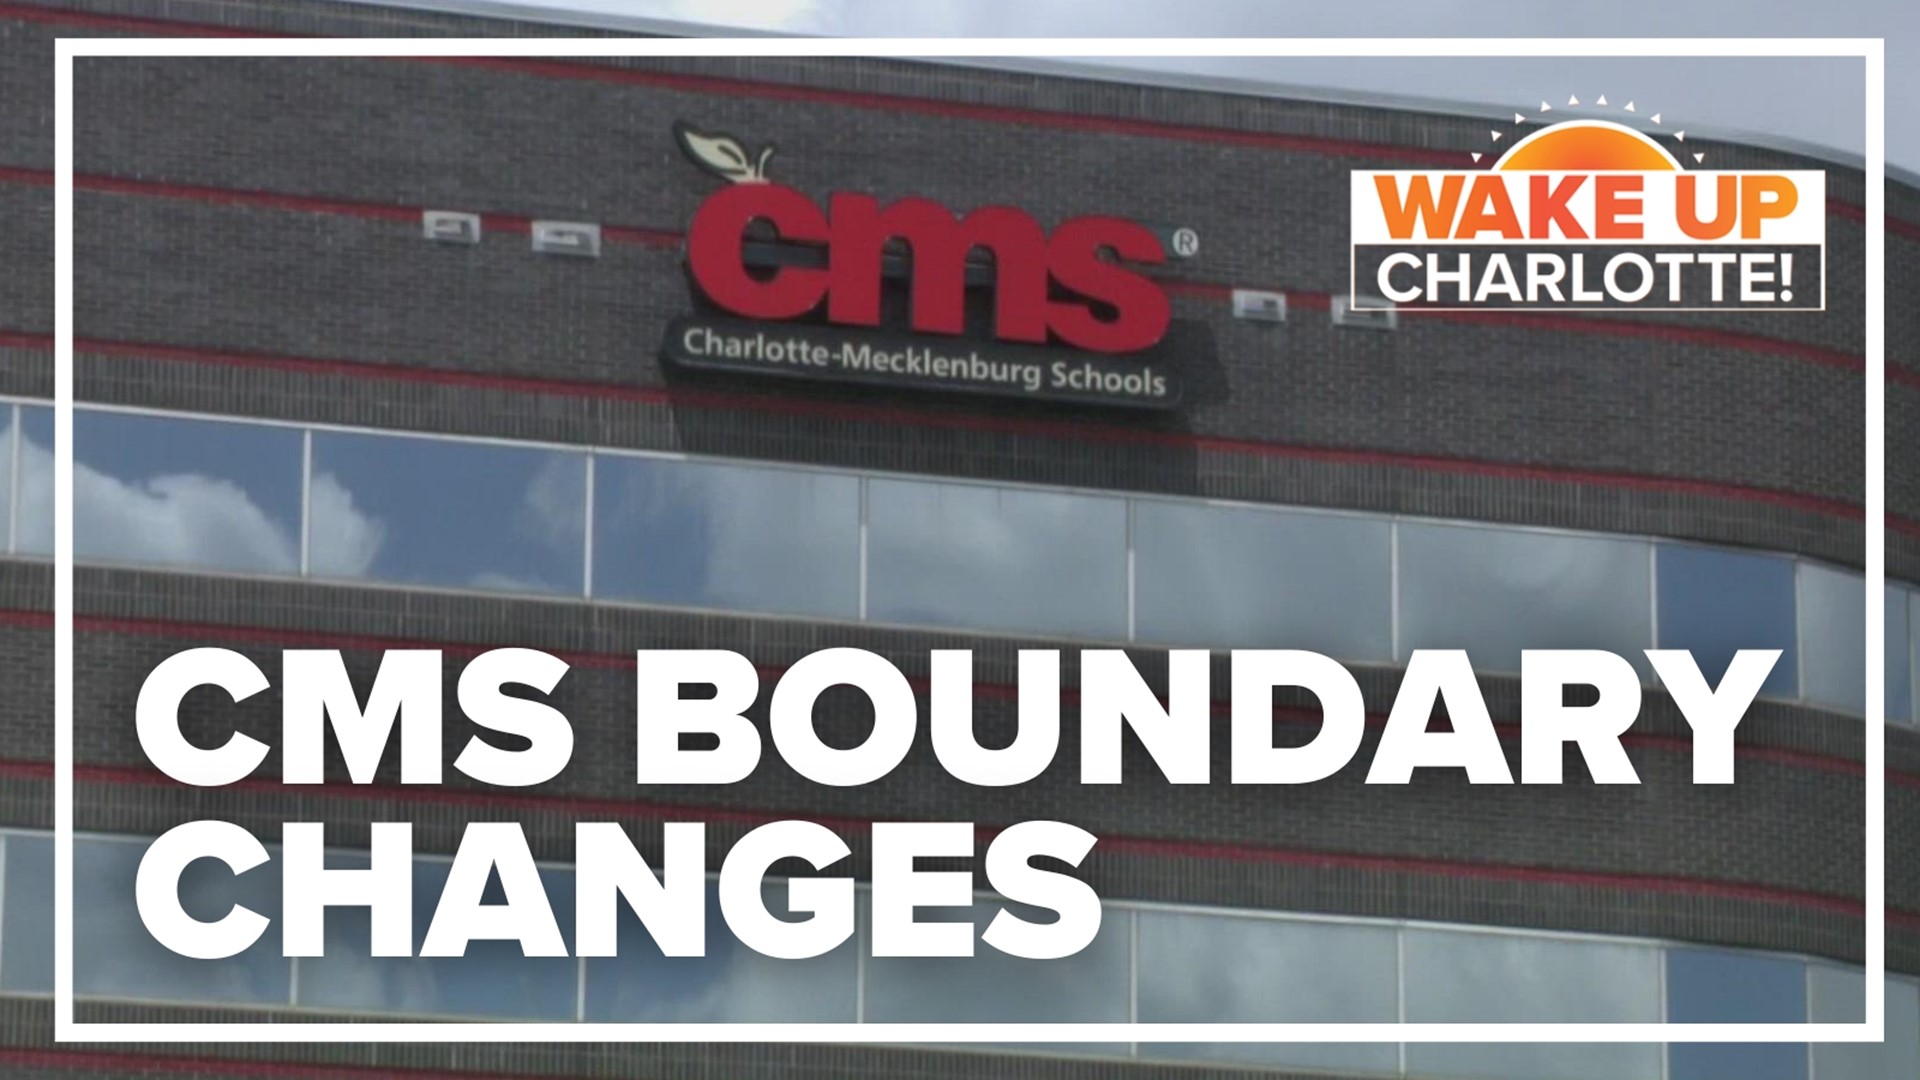 The changes will help make way for two new schools in south Charlotte that are being built to address overcrowding.